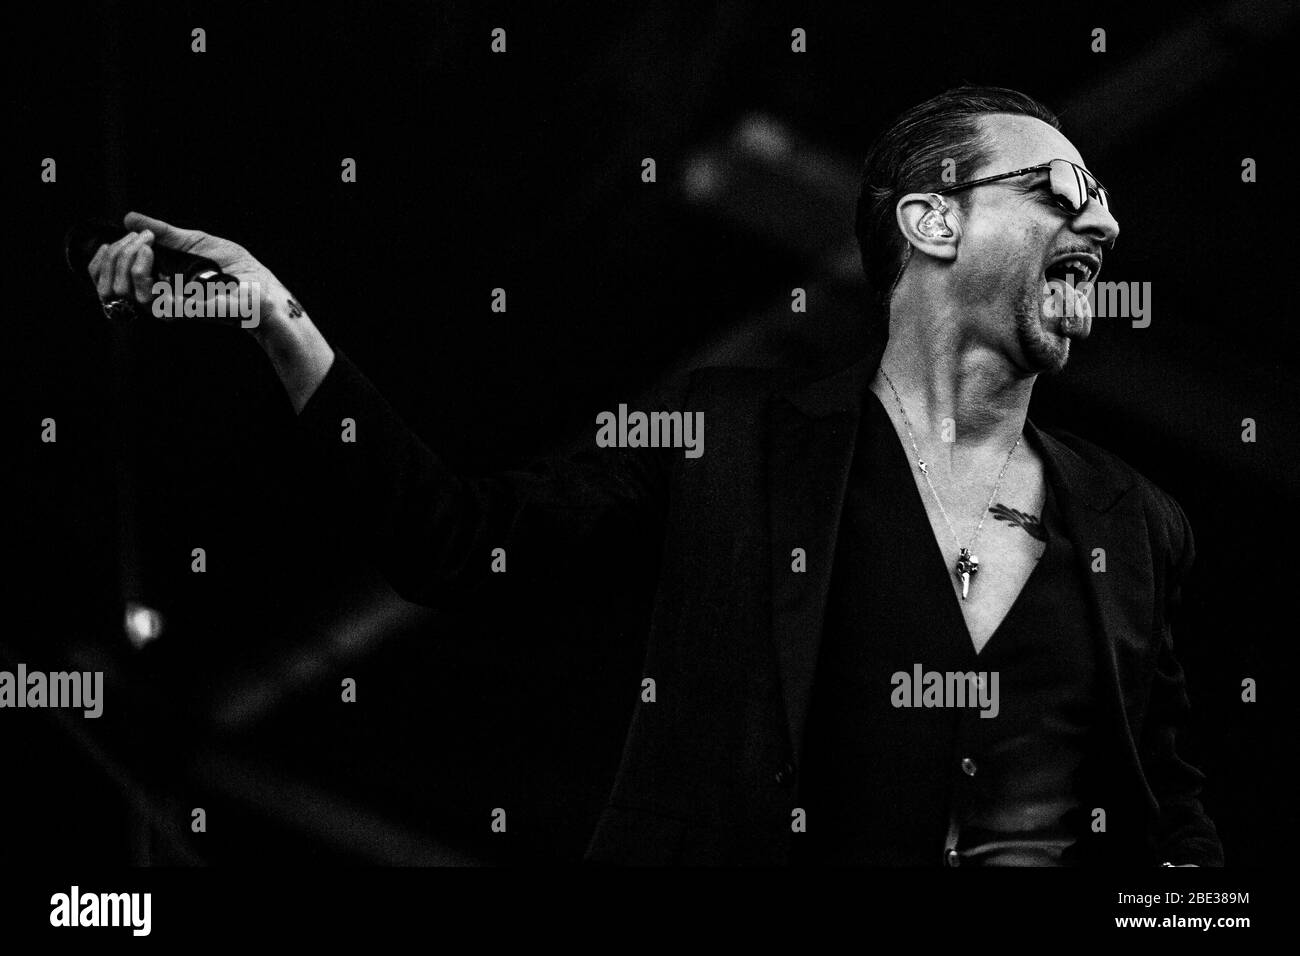 Odense, Denmark. 28th, June 2018. The English band Depeche Mode performs a live concert during the Danish music festival Tinderbox 2018 in Odense. Here singer and songwriter Dave Gahan is seen live on stage. (Photo credit: Gonzales Photo - Lasse Lagoni). Stock Photo